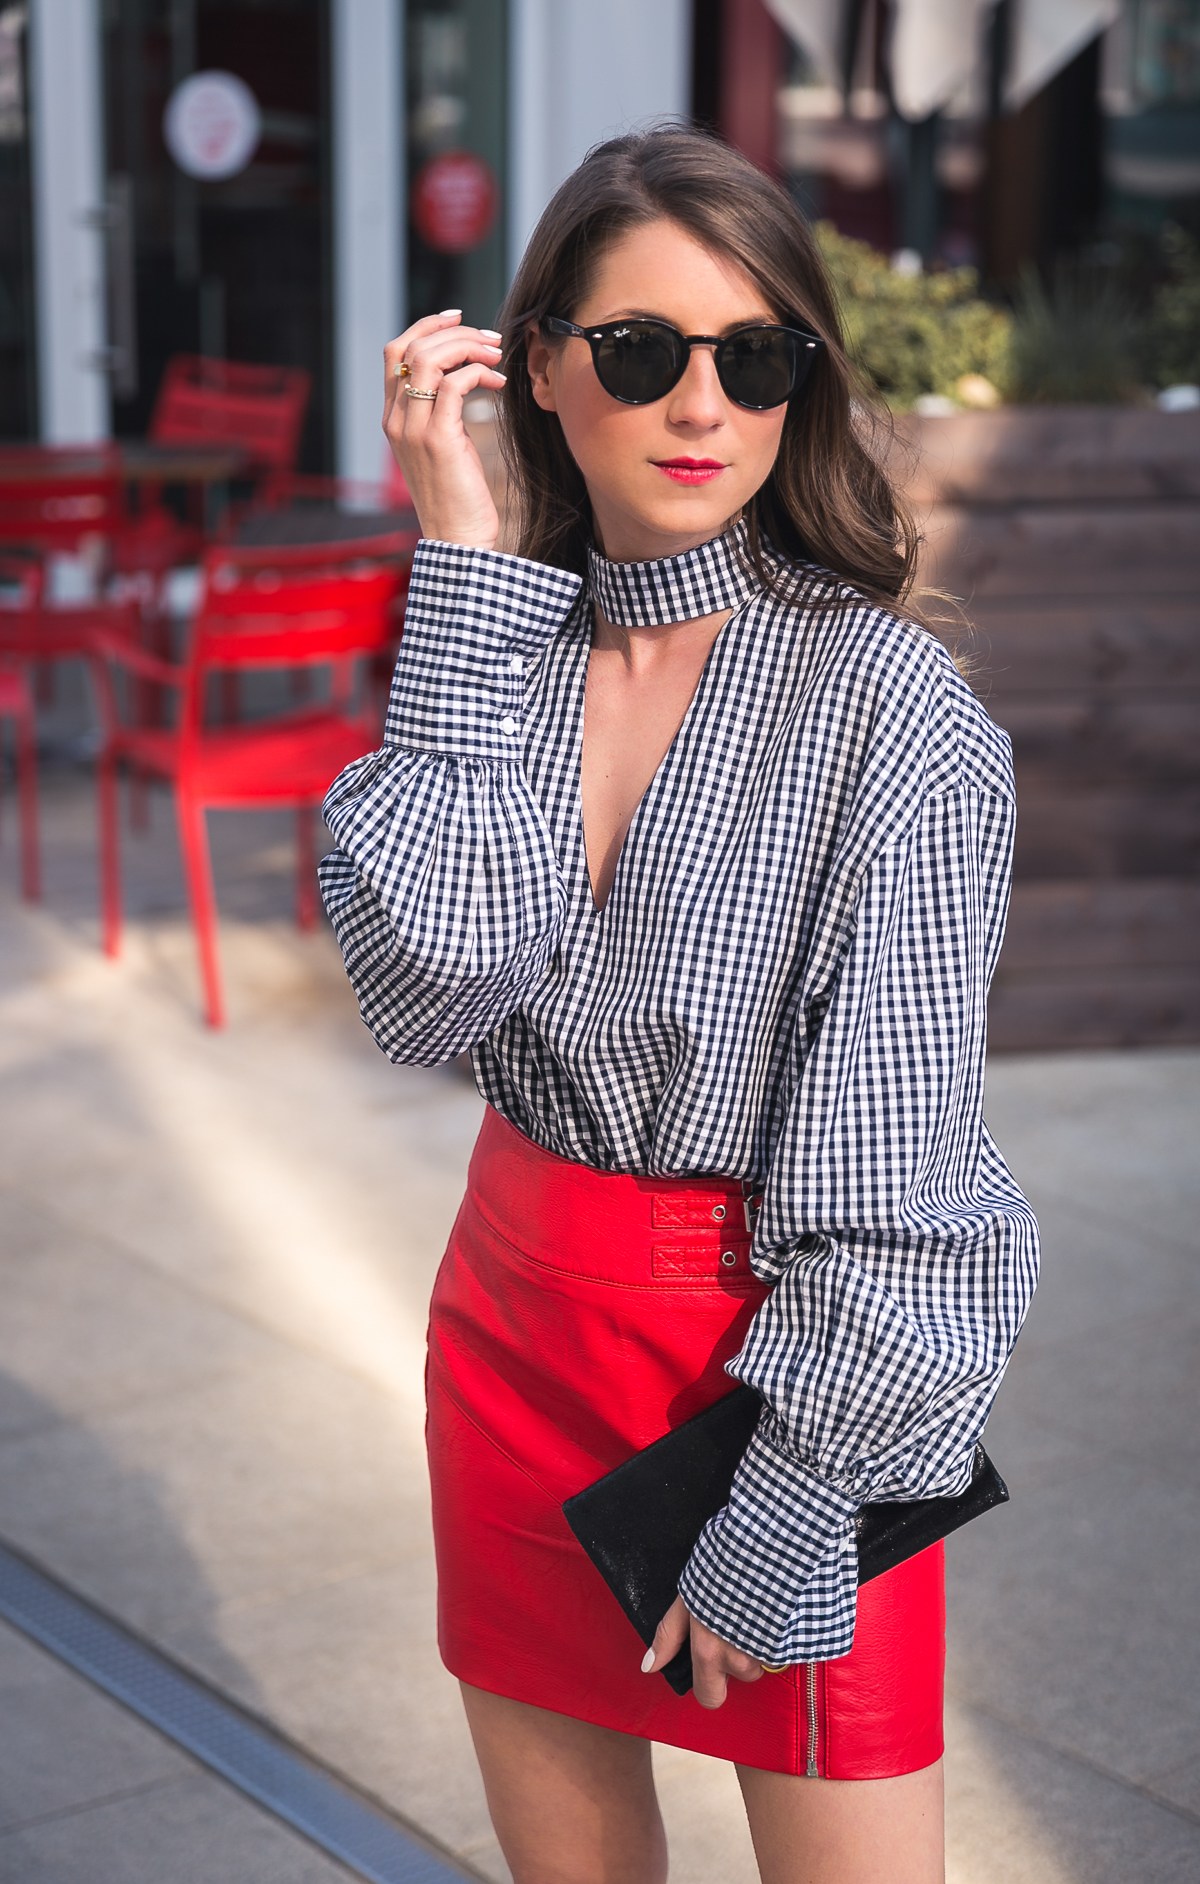 red skirt vichy check shirt clutch ray ban sunglasses sandals outfit inspiration spring 2017